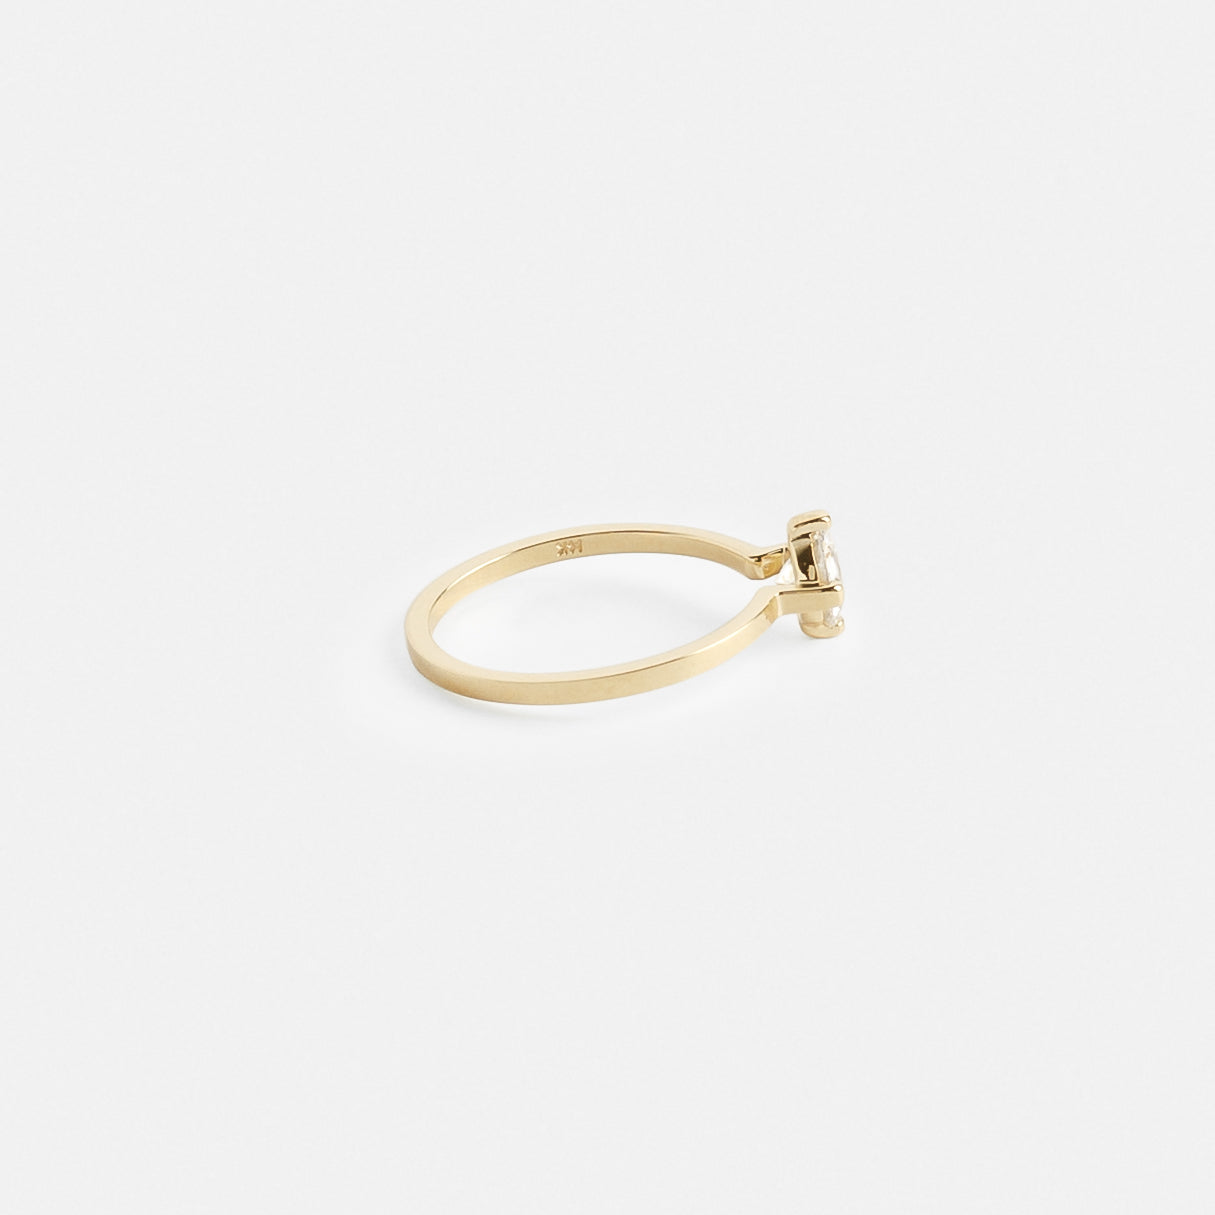 Ema Minimal Engagement Ring in 14k Gold set with a round brilliant cut 1ct lab-grown diamond By SHW Fine Jewelry NYC